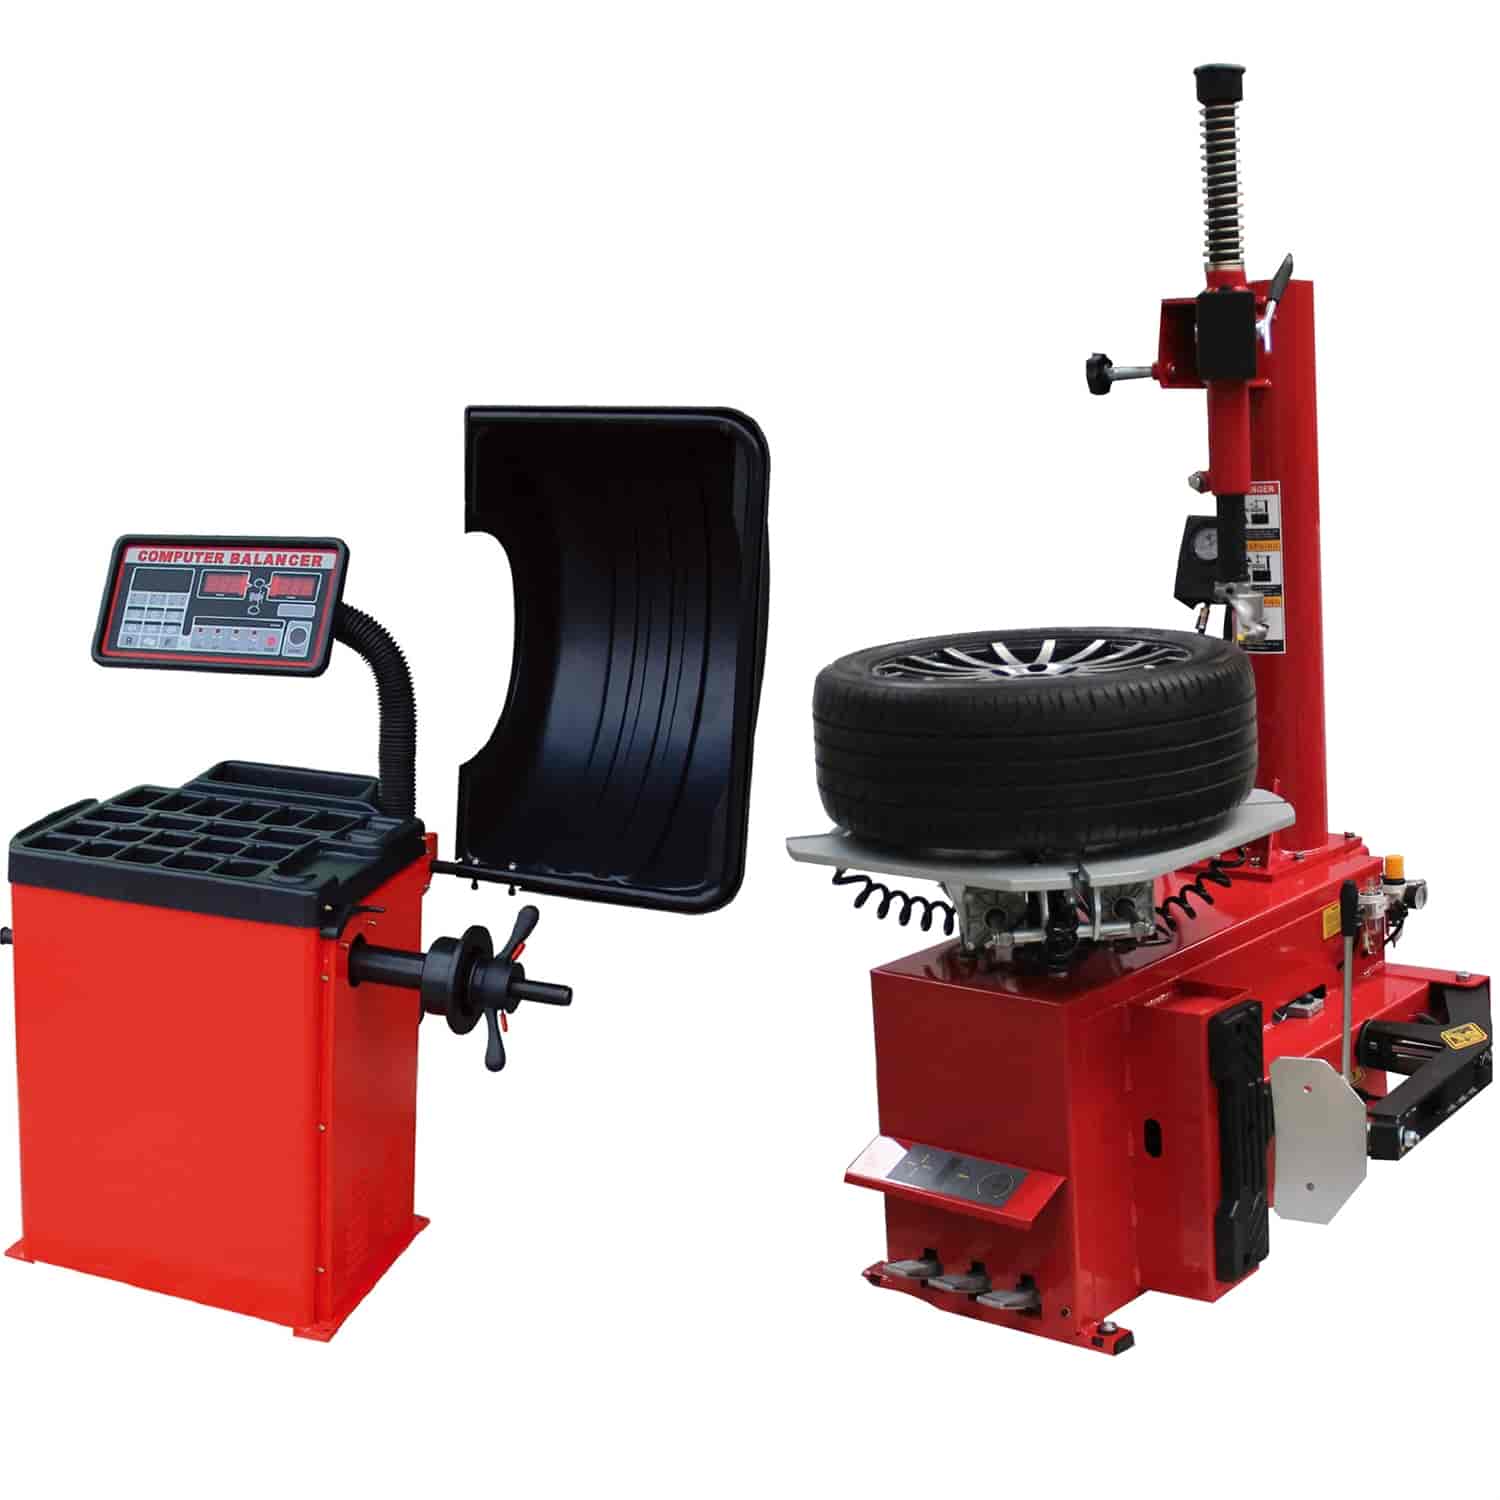 CKTC950WB953 Tire Changer and Wheel Balancer Combo [Includes TC-950 & WB-953]